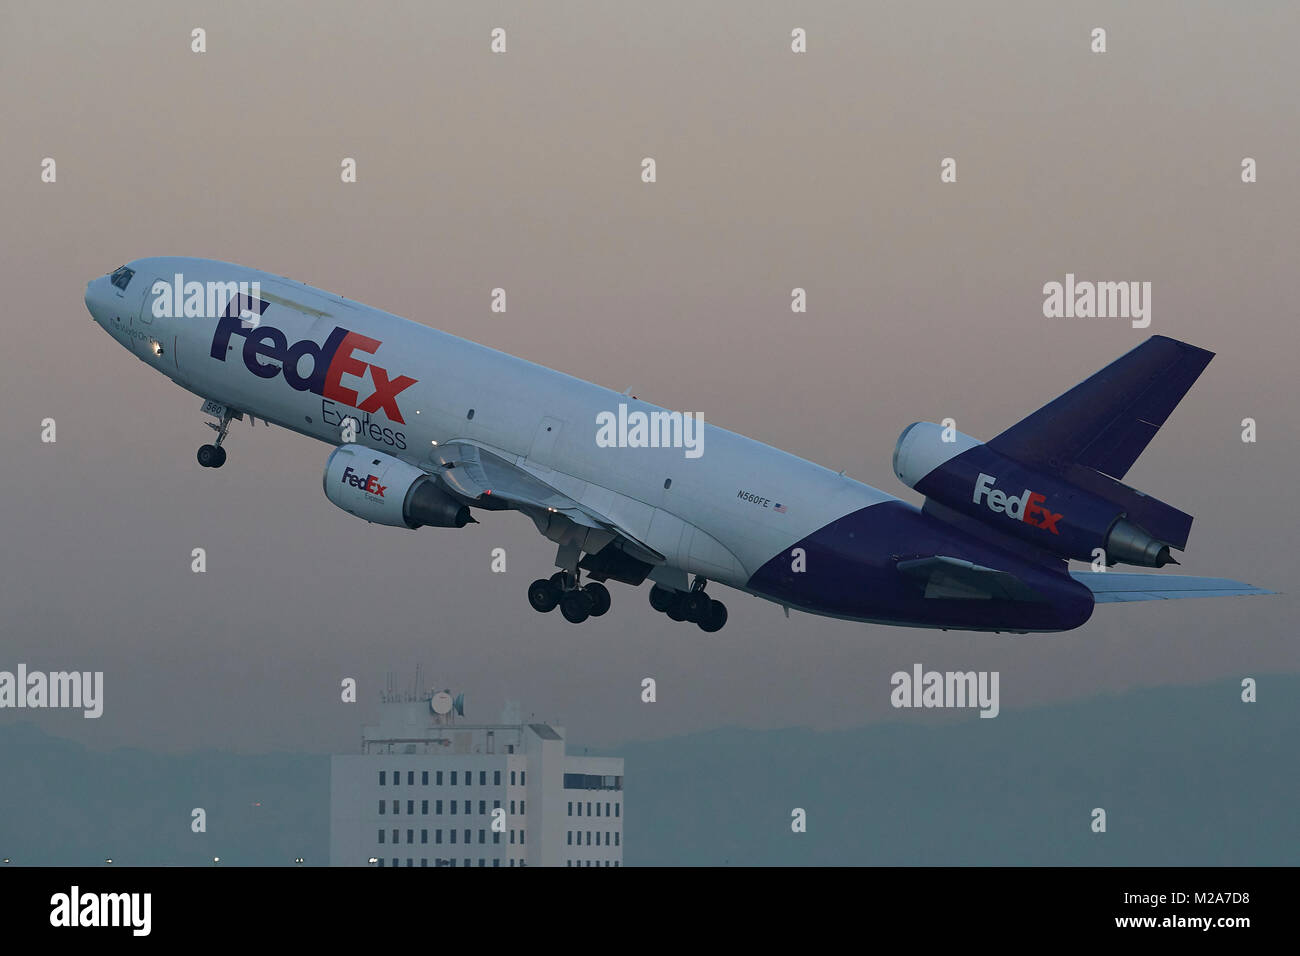 Sunrise Take Off Of A Vintage Federal Express, FedEx Express, DC-10 Jet Freighter At Los Angeles International Airport, LAX, California, USA. Stock Photo